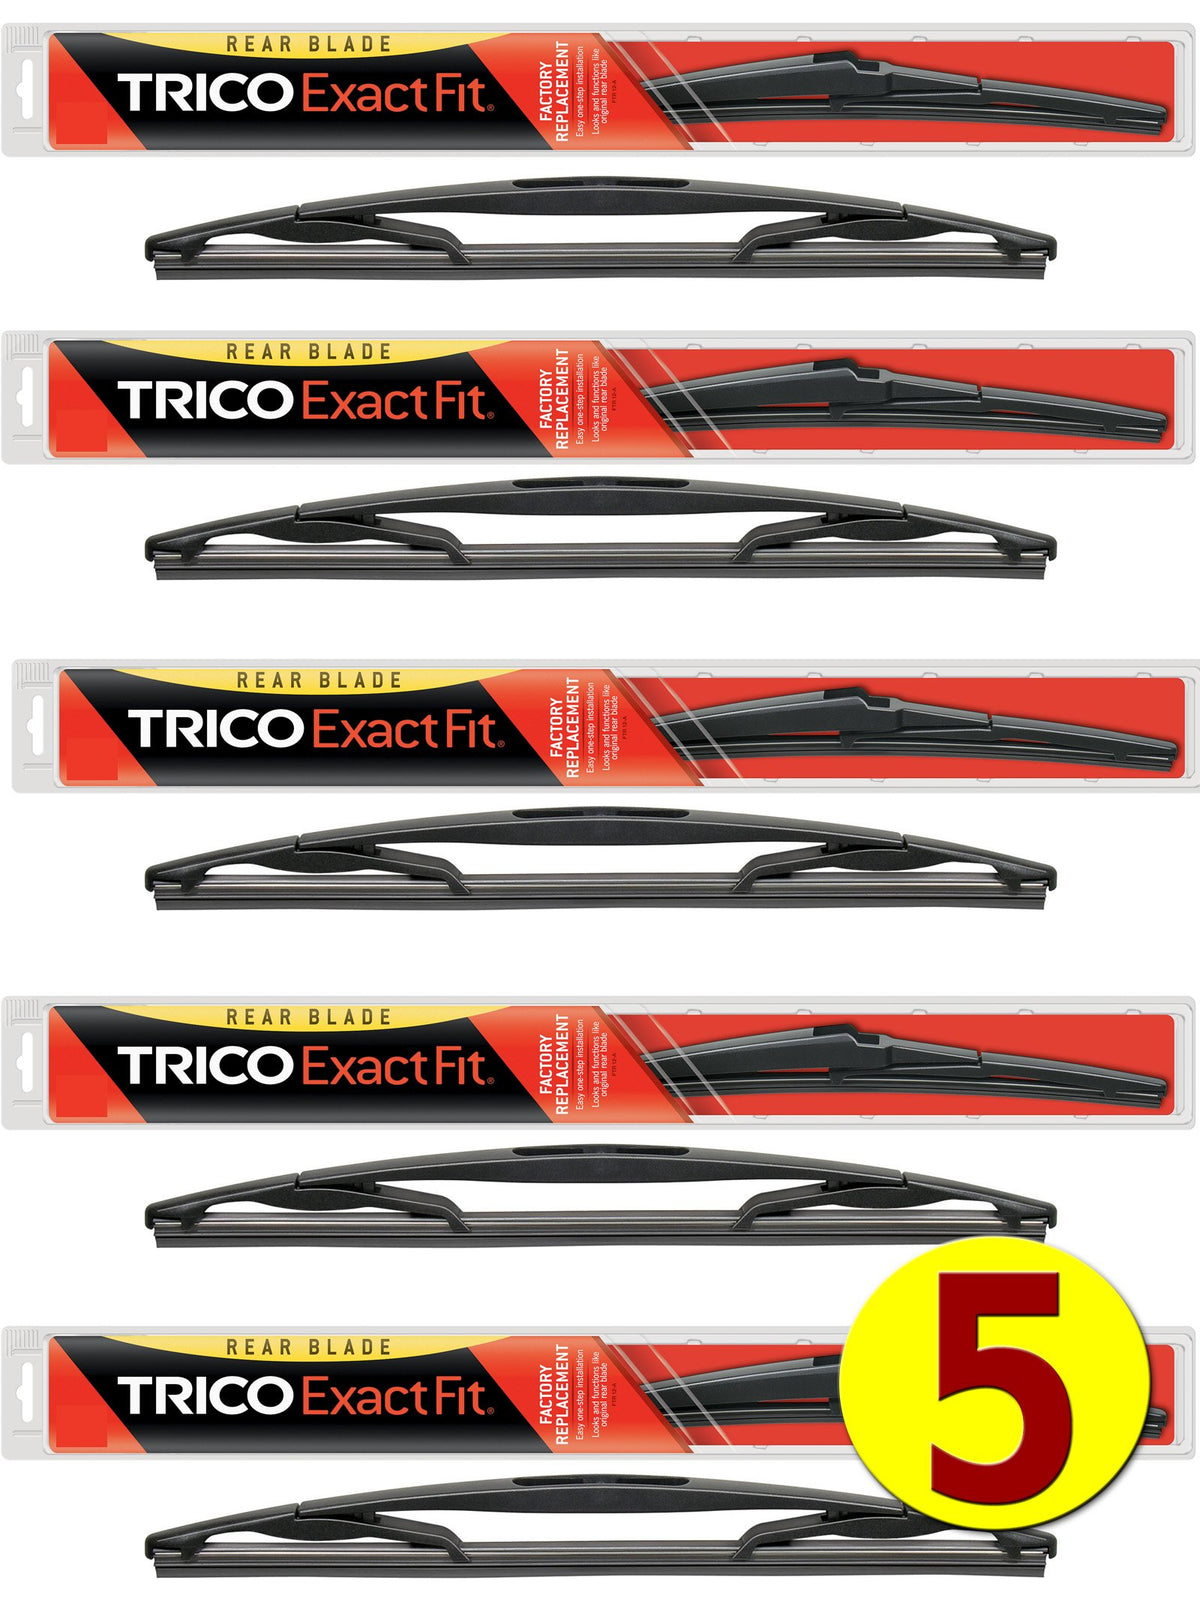 TRICO 12-E Exact Fit 12" Rear Wiper Blades Pack of 5 for Fleets & Service Repair Shops